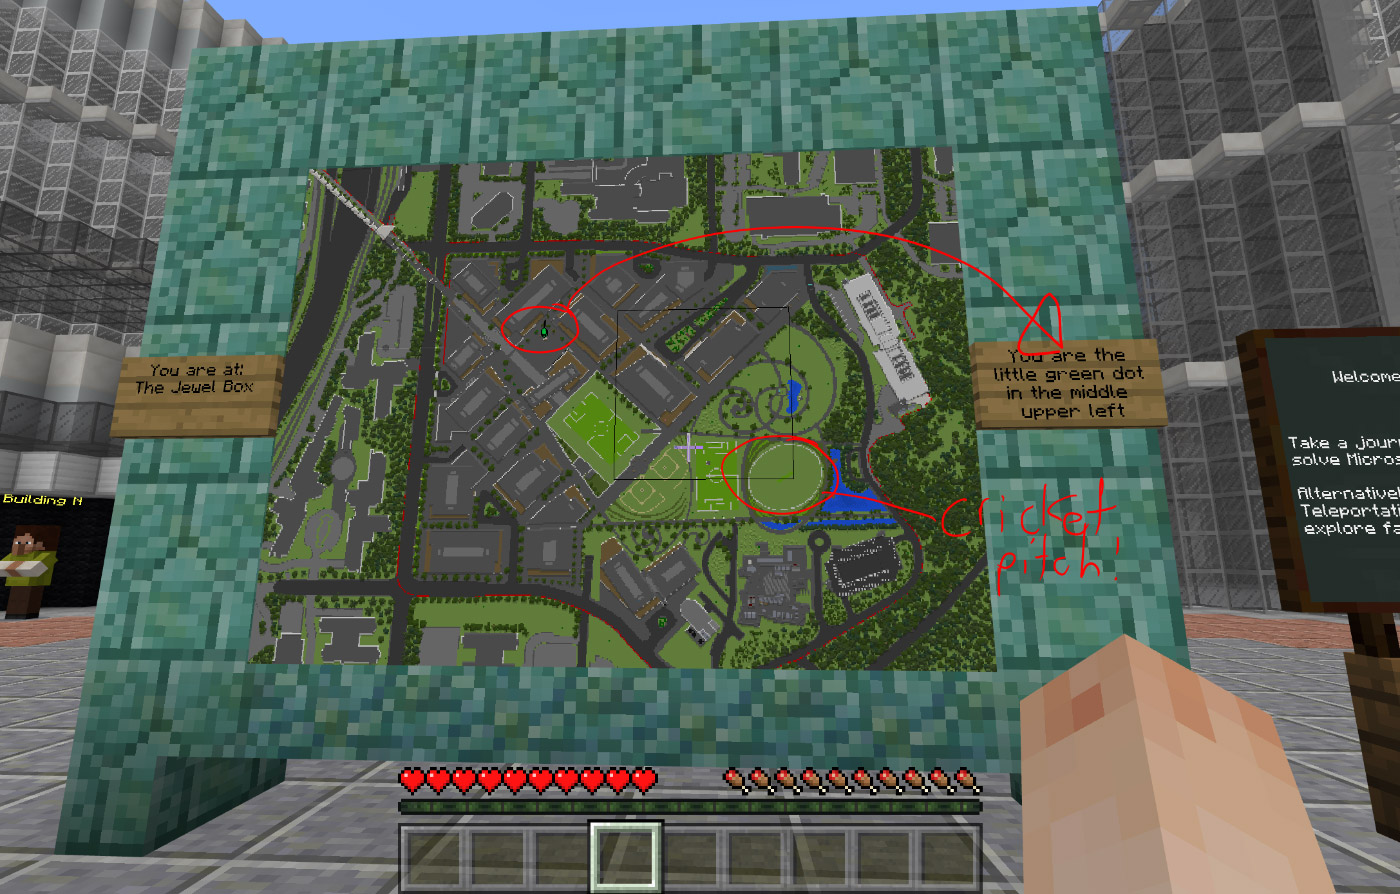 Microsoft S Redmond Campus Opens To The Public In Minecraft